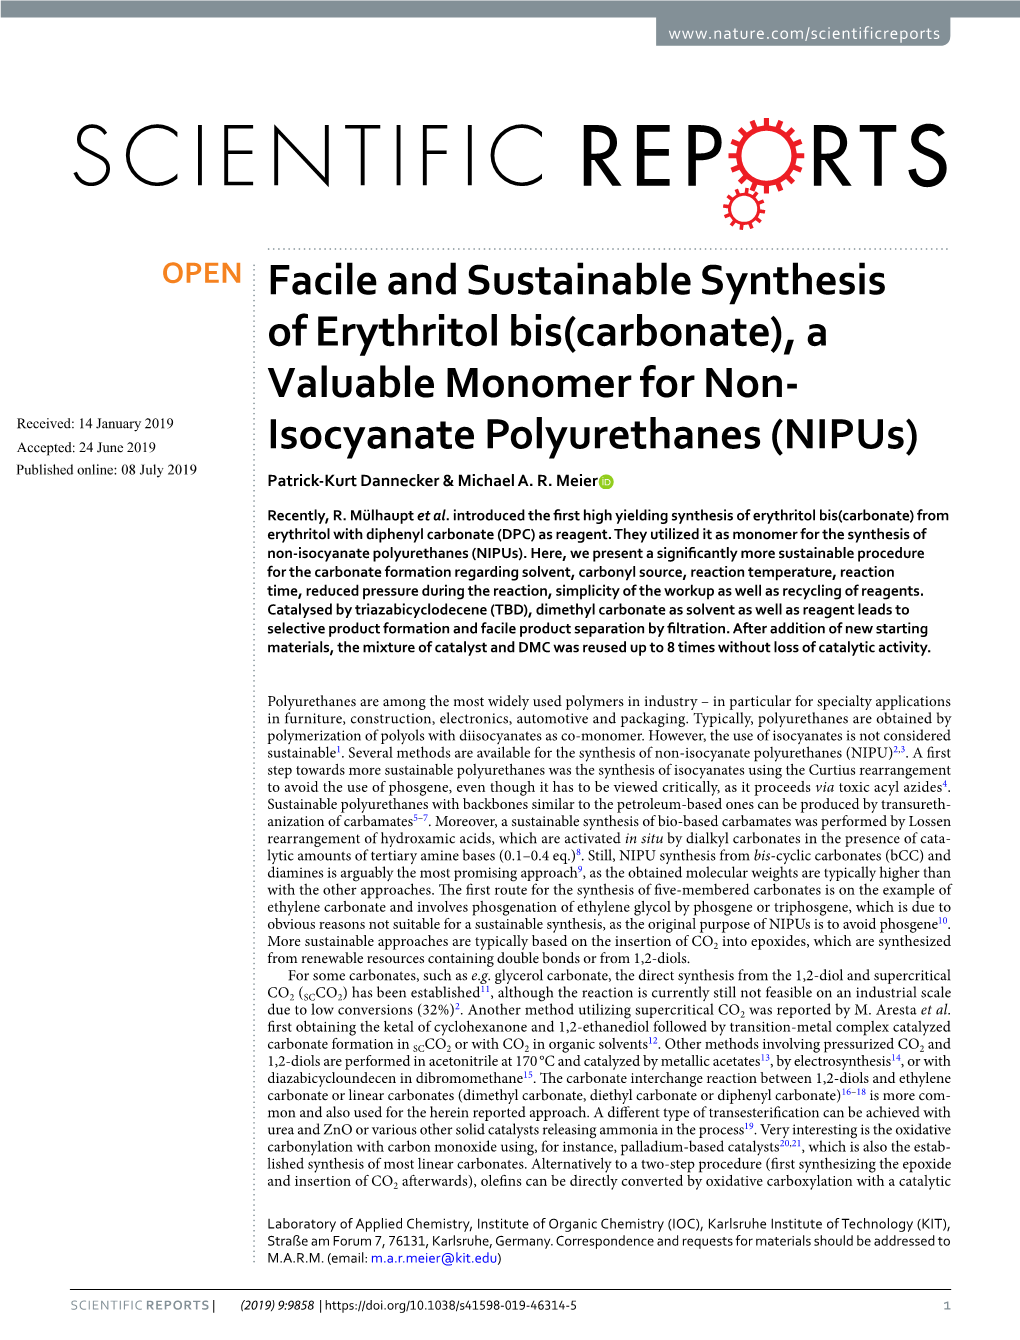 Facile and Sustainable Synthesis of Erythritol Bis(Carbonate)